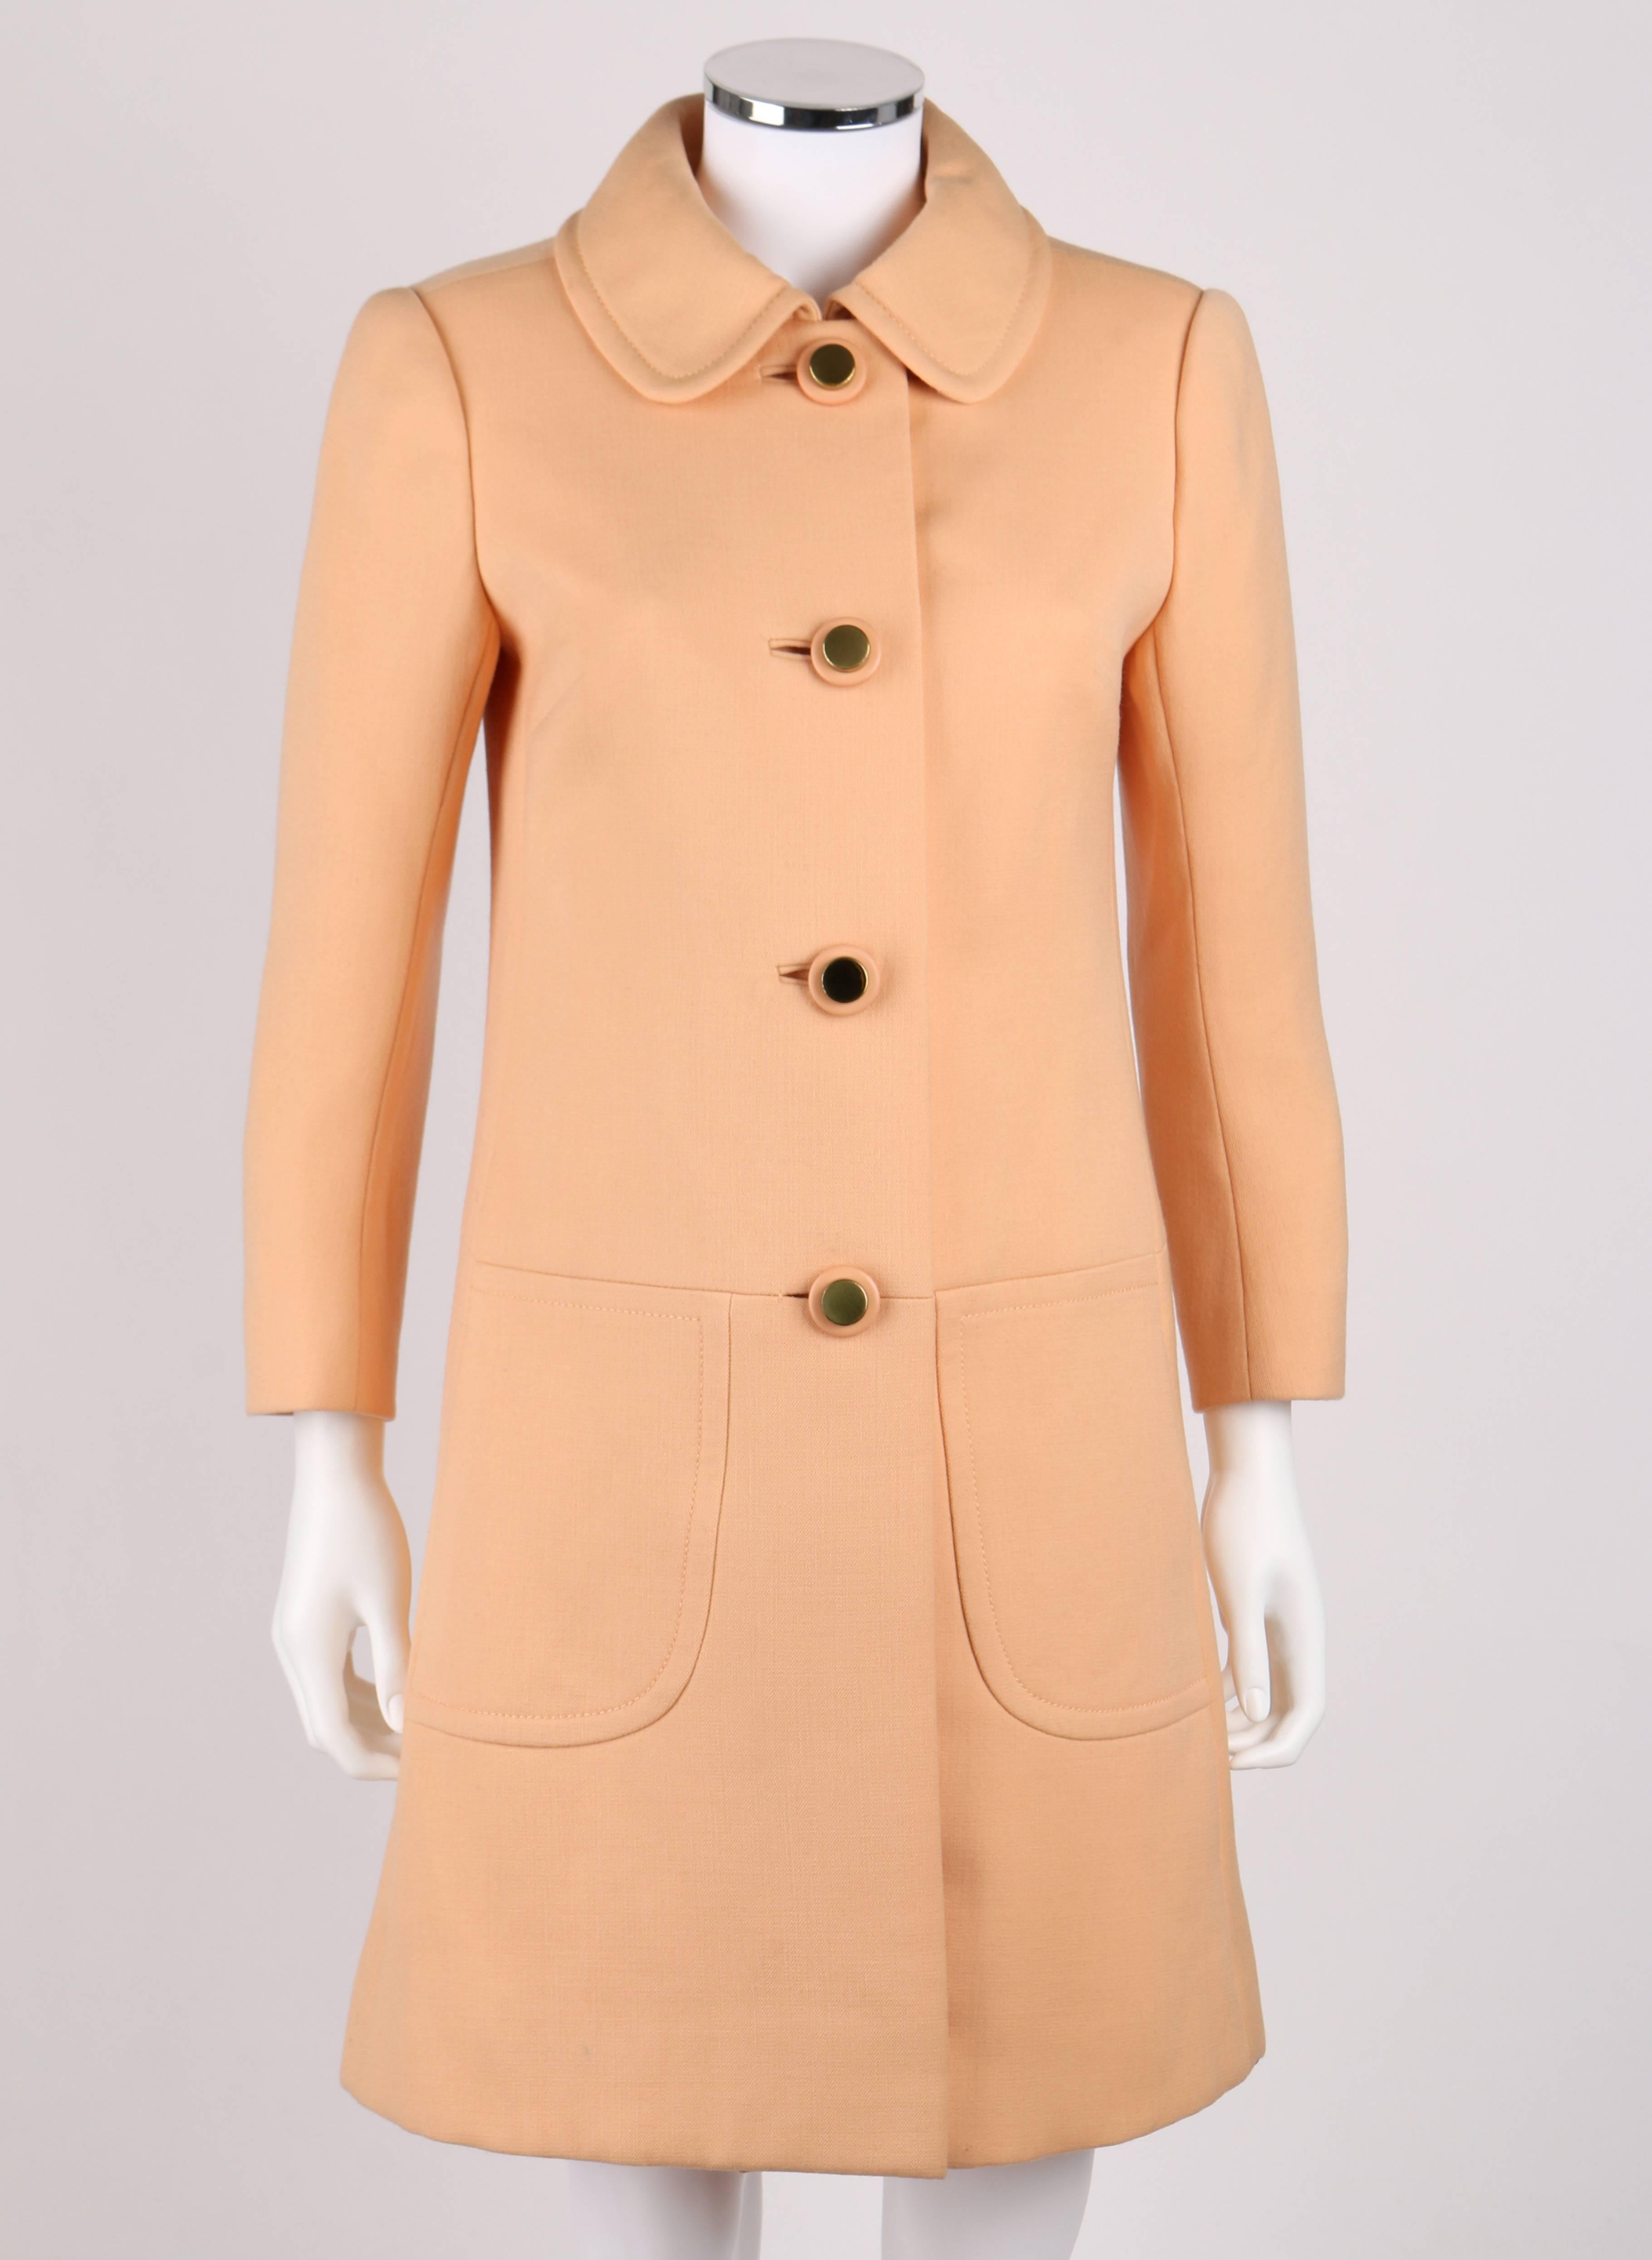 Vintage Diorling By Christian Dior c.1960's peach 100% wool coat. Peter pan collar. Two front rounded inseam pockets. Four center front button closures. Round three dimensional gold and peach buttons. Princess seams. Fully lined. Marked Fabric